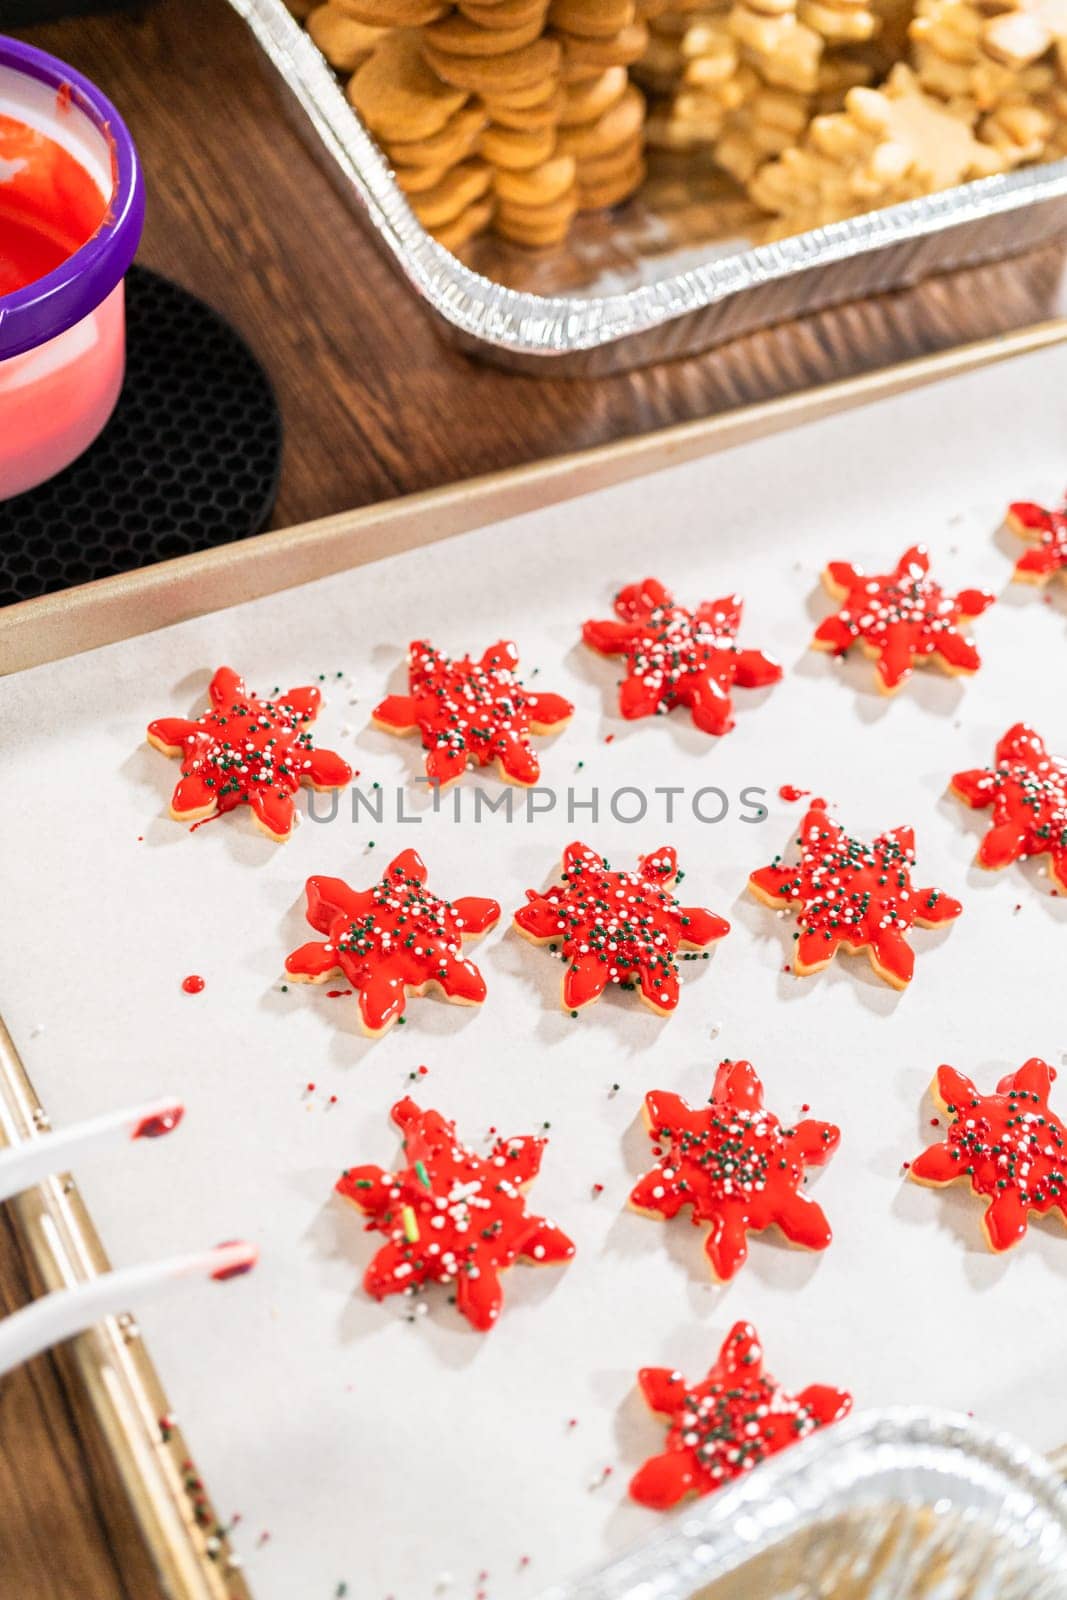 Vivid red star-shaped cookies, generously iced and speckled with green and white holiday sprinkles, freshly prepared and laid out to dry.